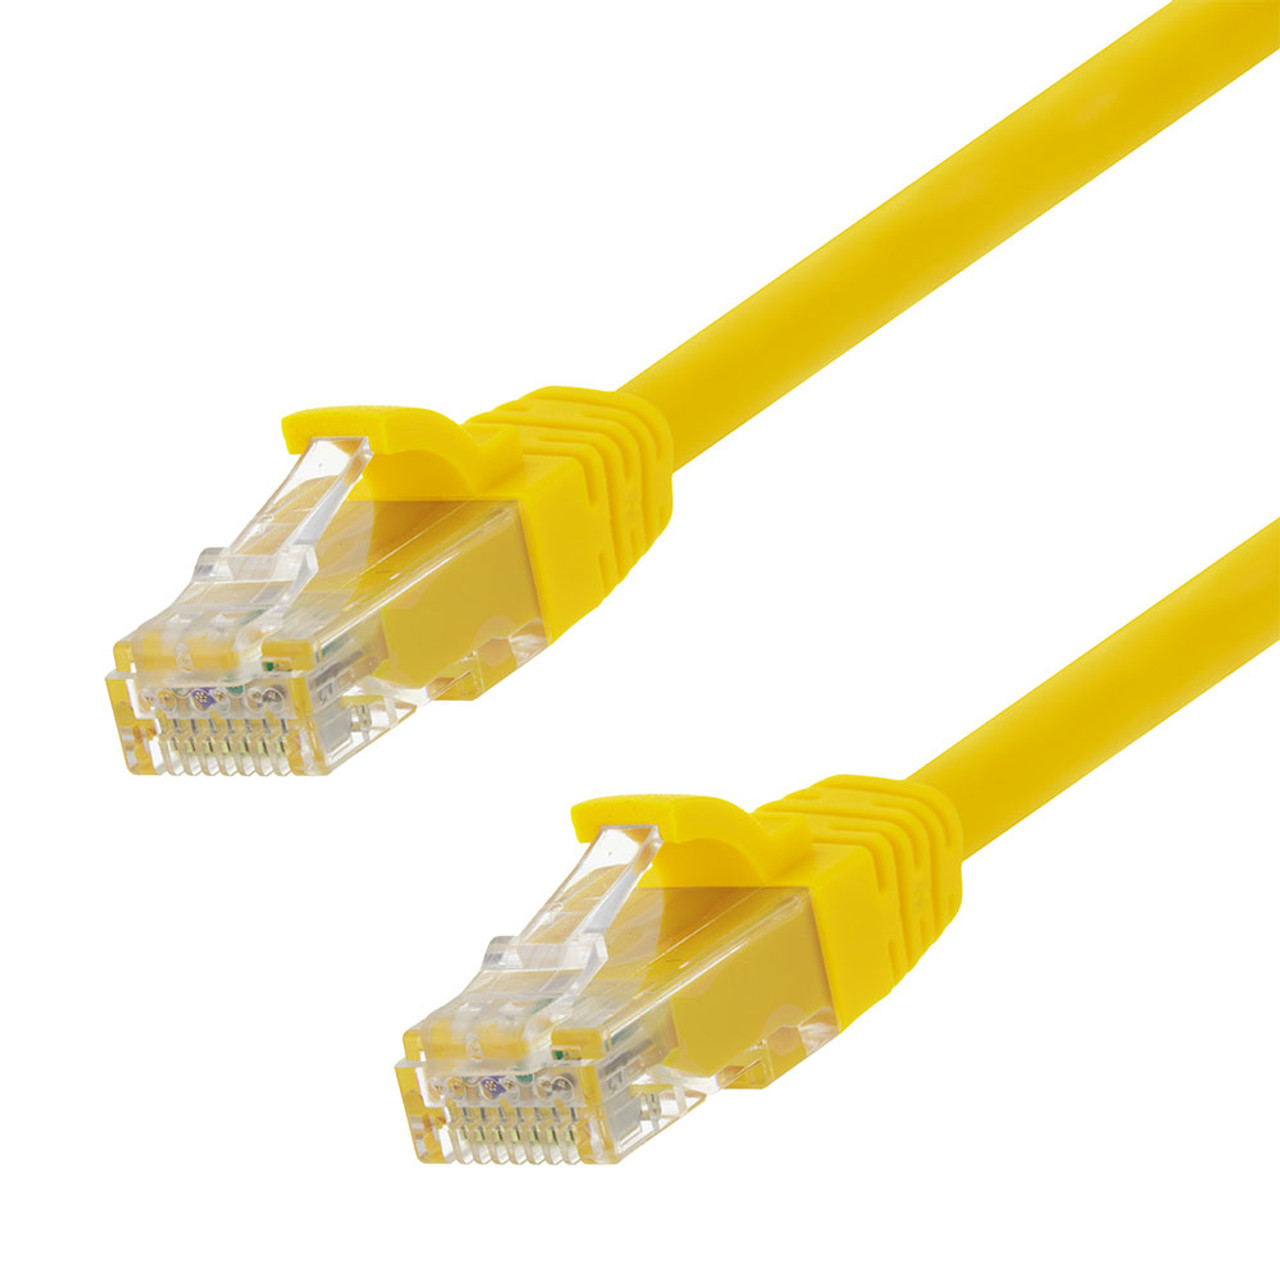 Ethernet Patch Cable CAT6A, UTP, 24AWG, 5 Ft,  10 pack, Yellow